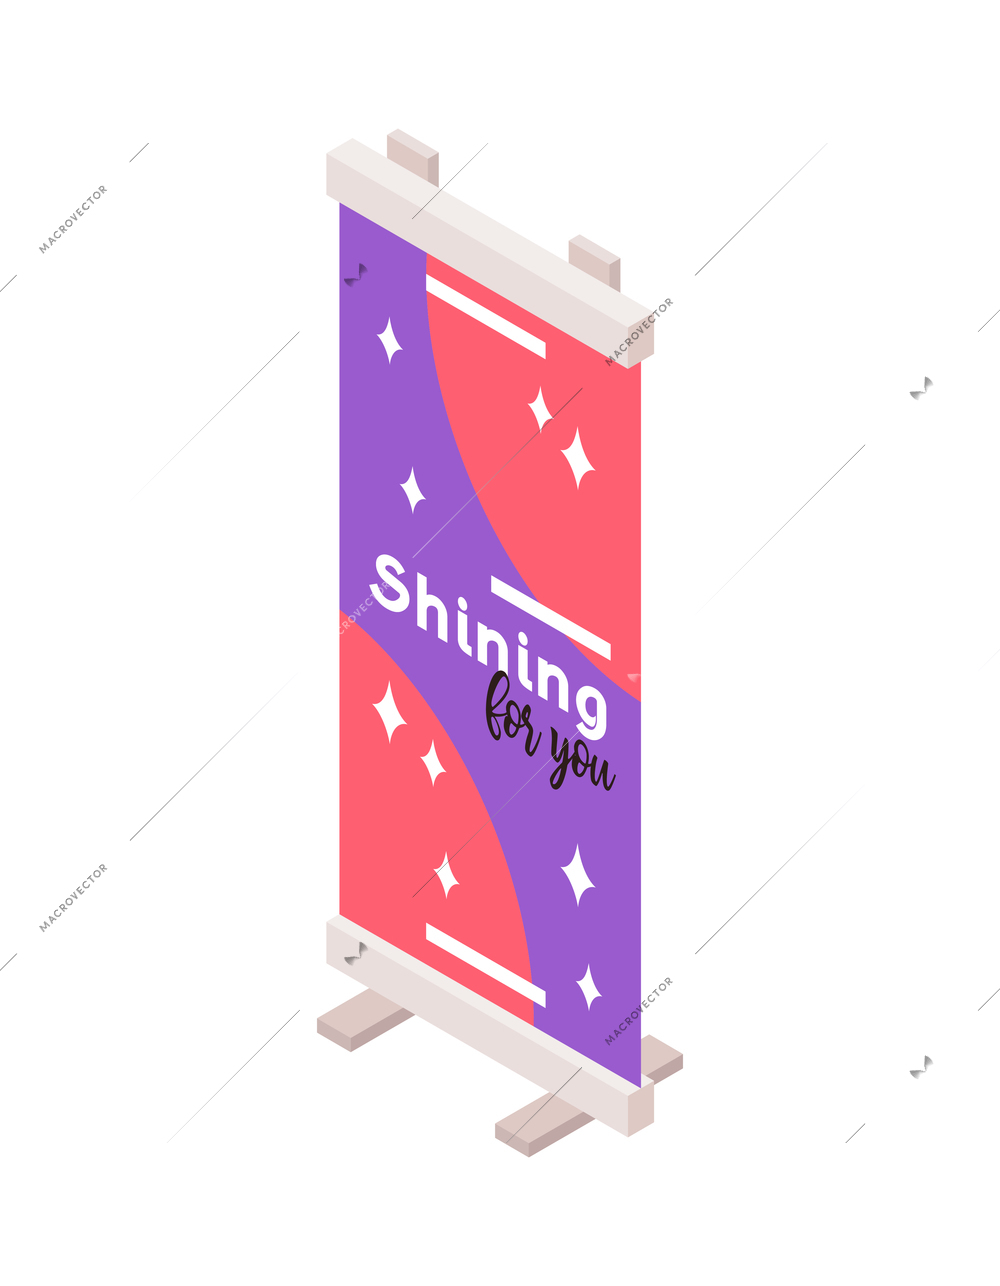 Isometric icon with colored banner stand for exhibition presentation trade show 3d vector illustration